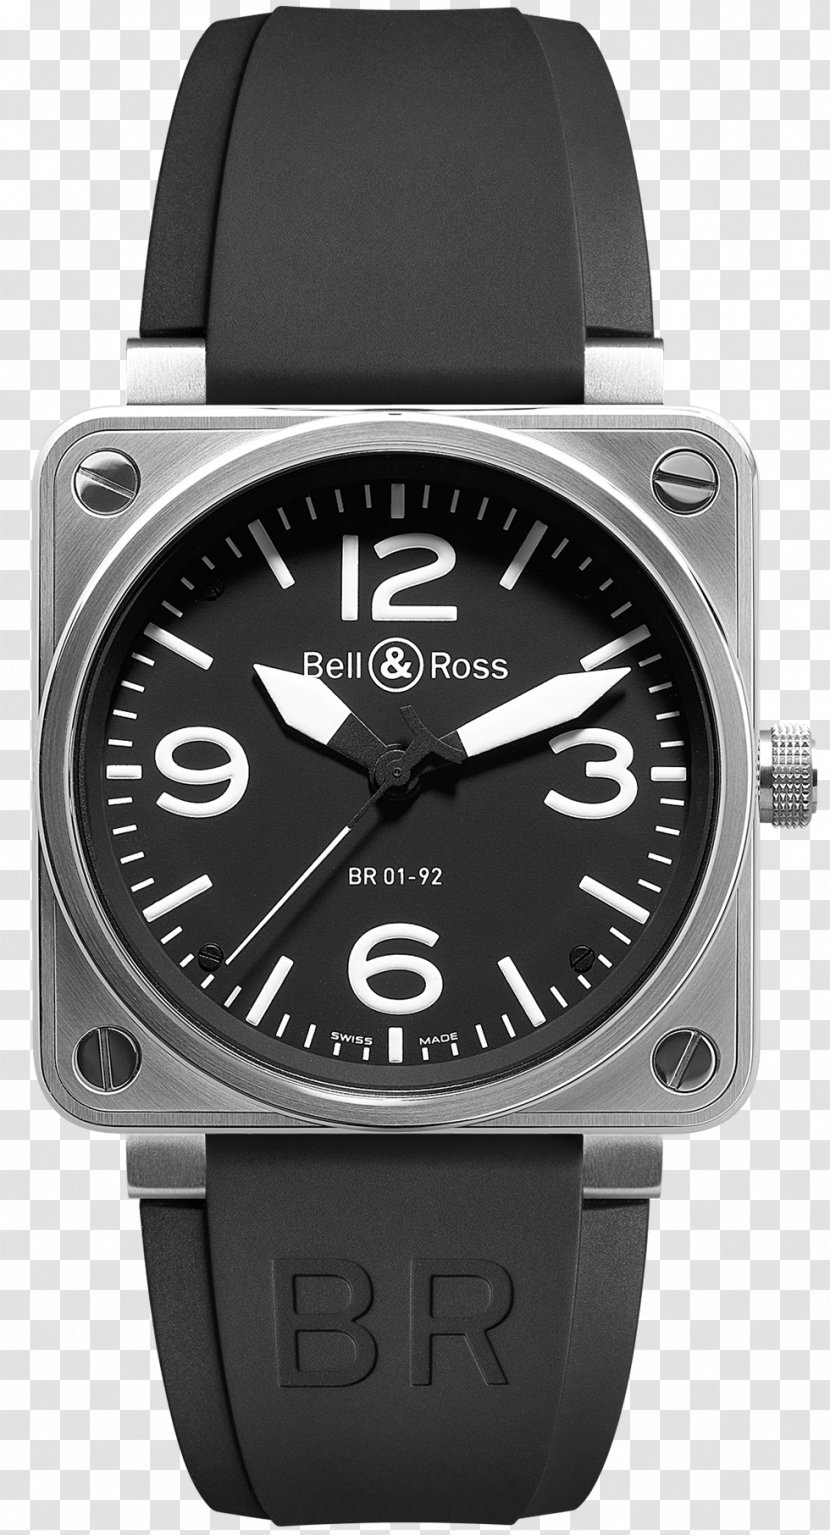 Bell & Ross, Inc. Automatic Watch Diamond - Ross - Metalcoated Crystal Transparent PNG